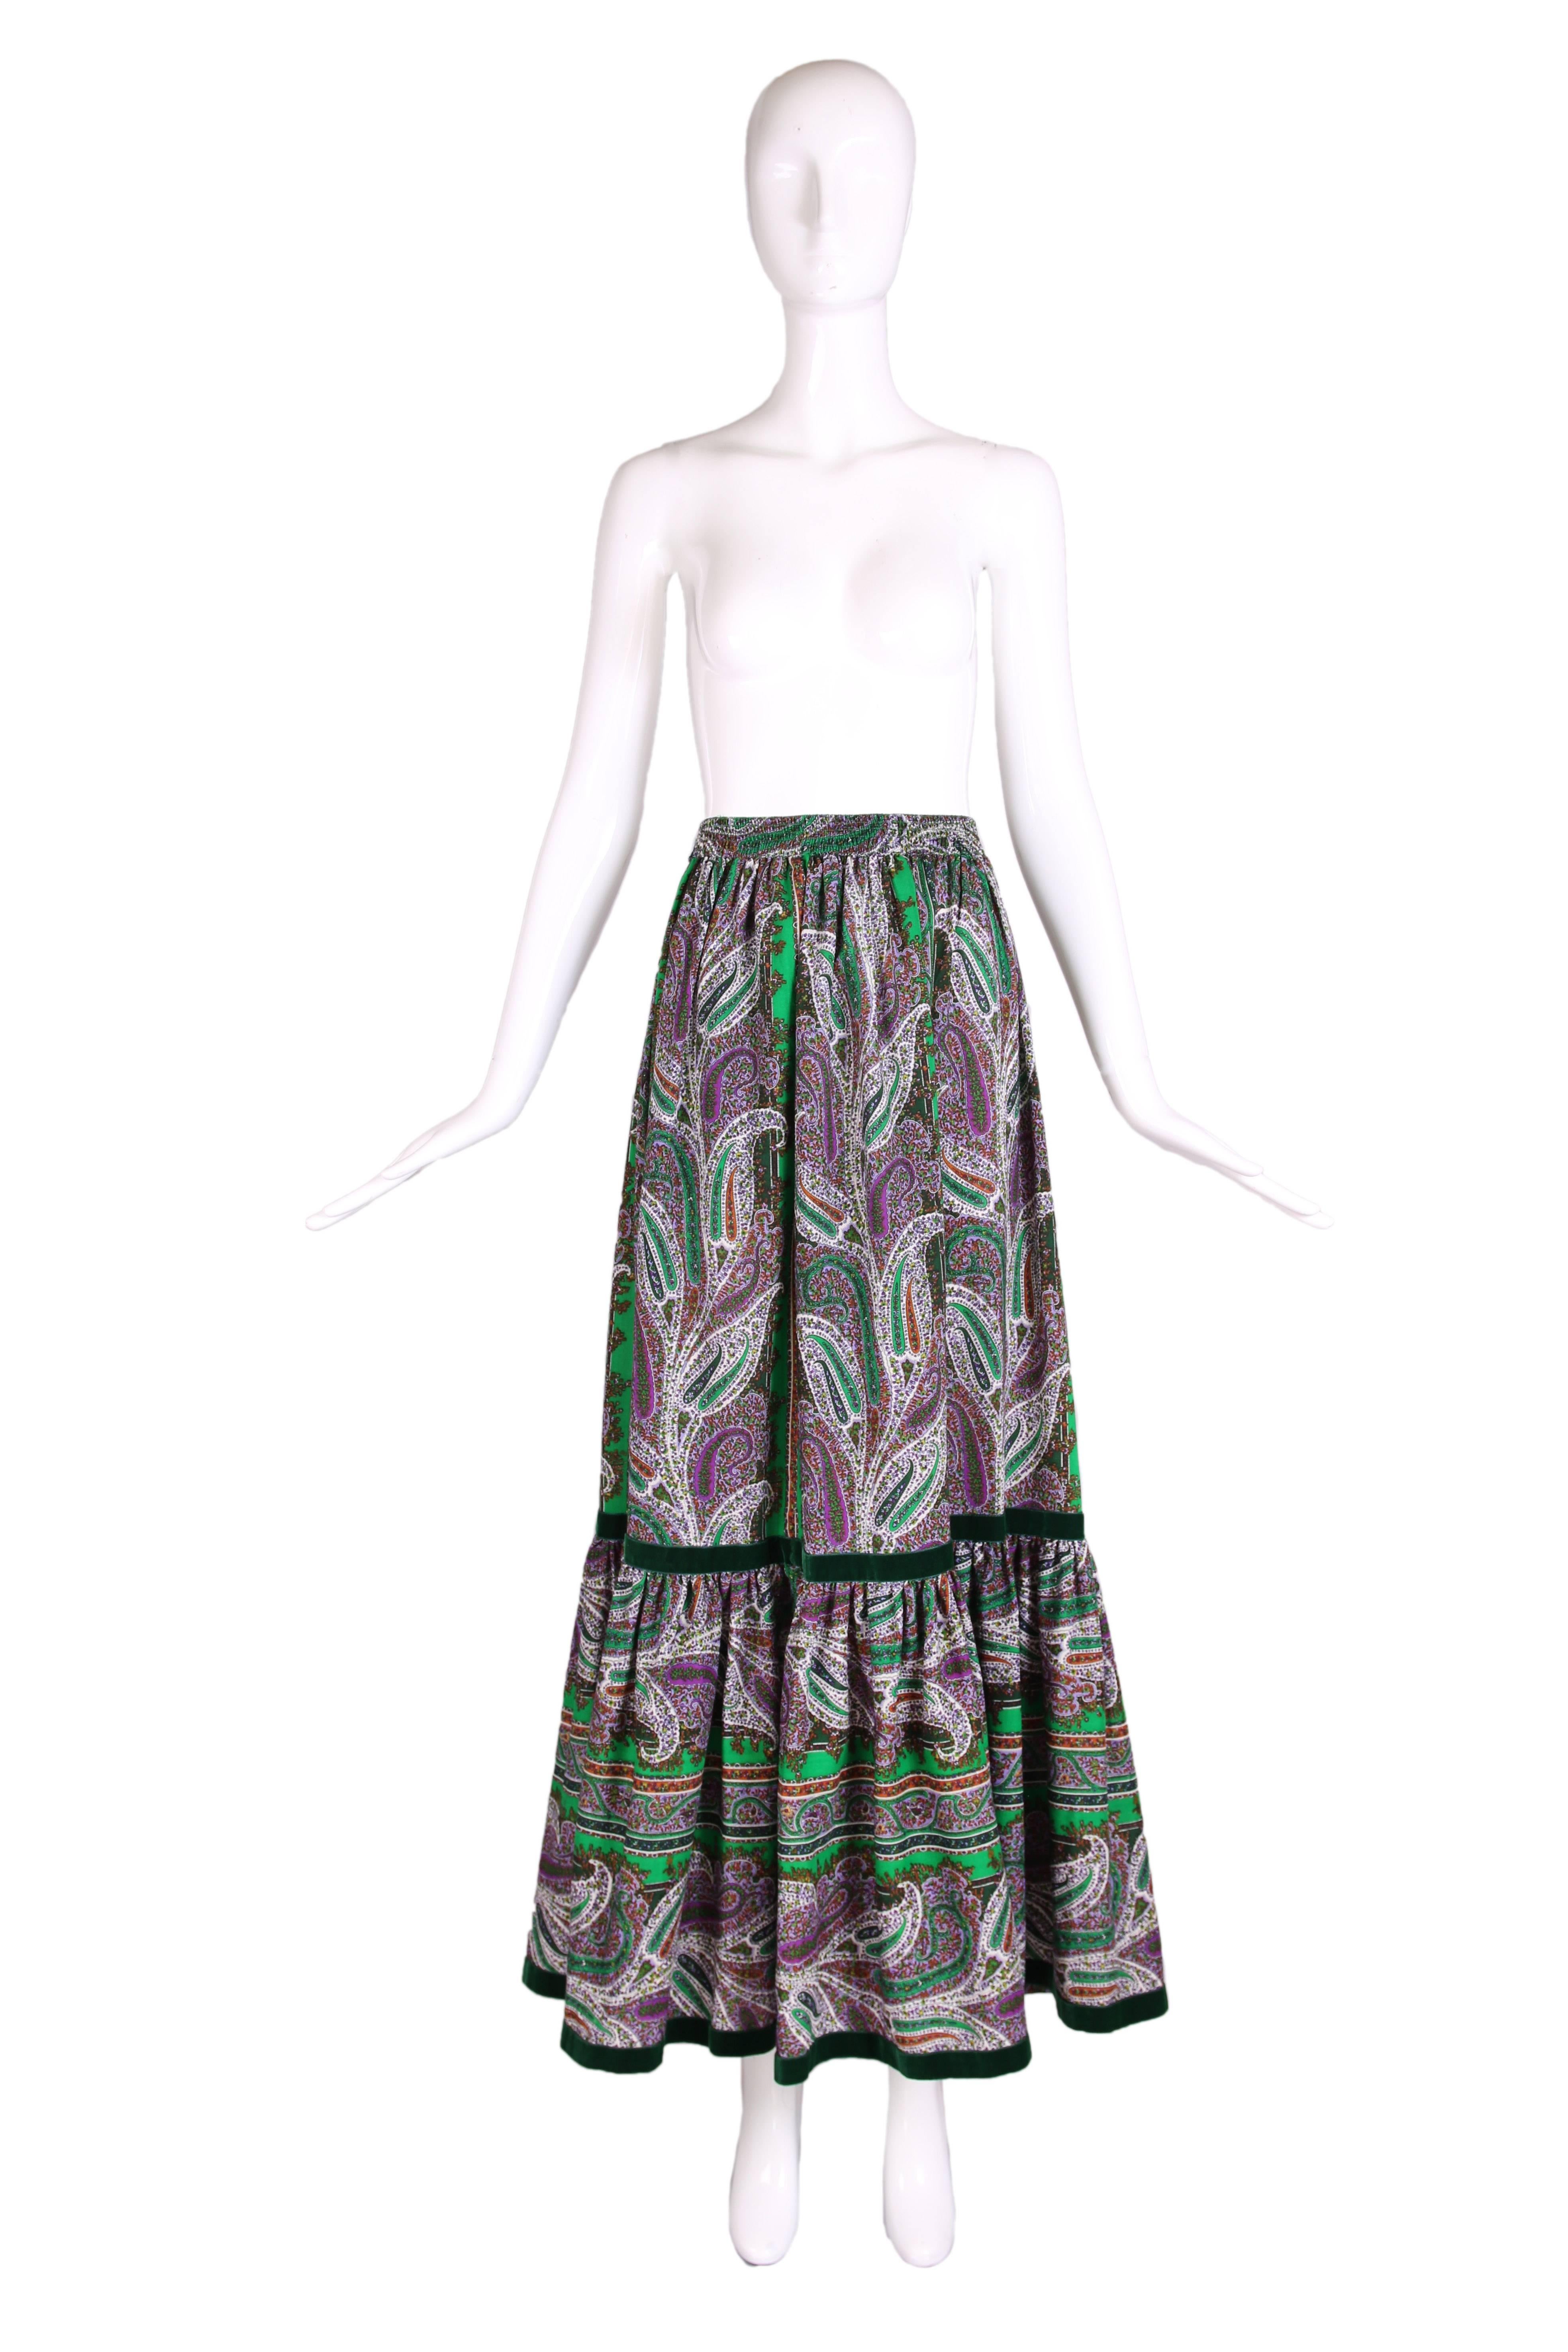 Vintage Yves Saint Laurent green, purple, red and black paisley print light weight wool maxi skirt in a peasant style with green velvet trim and an elastic waistband. Size 40. In excellent condition.